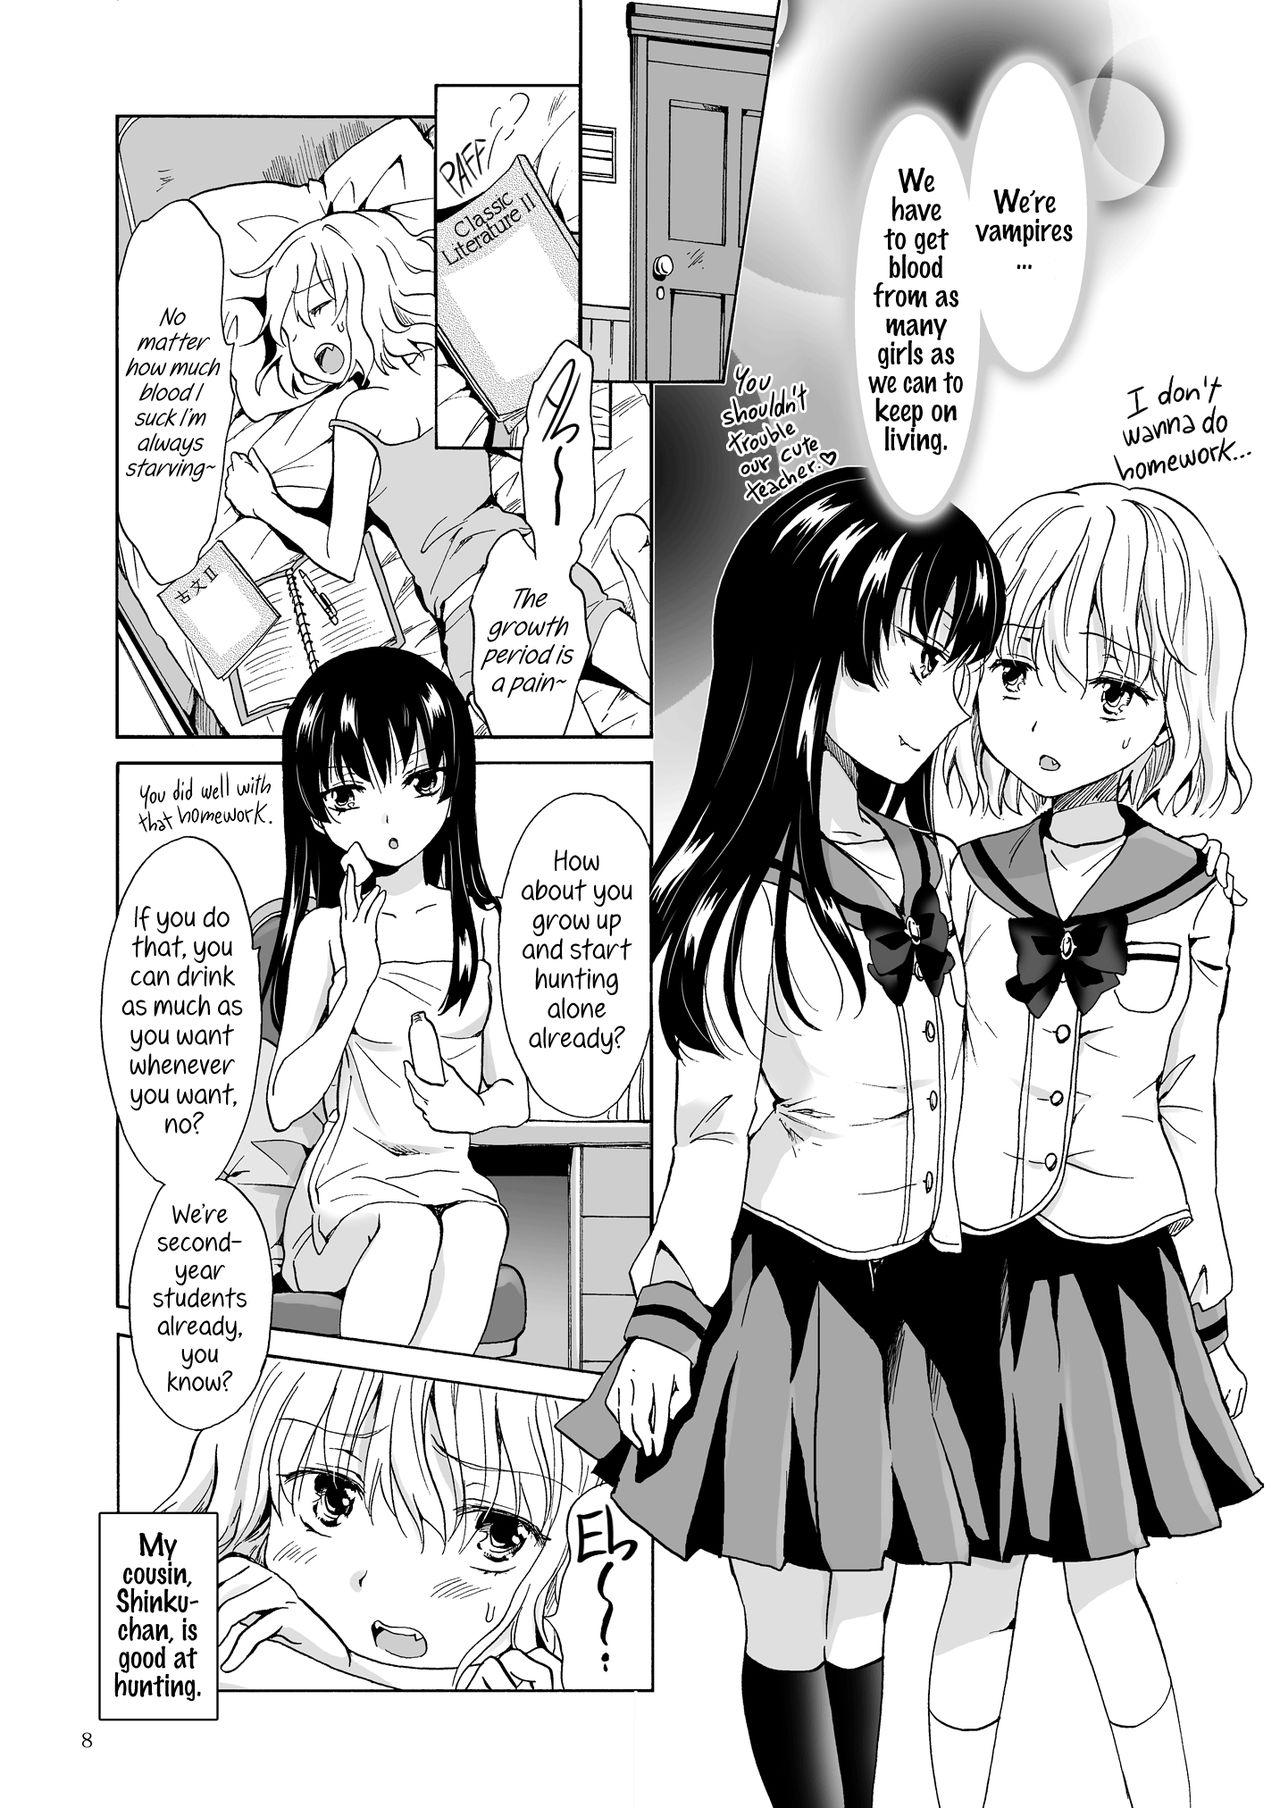 Pick Up Kiss Me! Vampire Girls Tites - Page 8